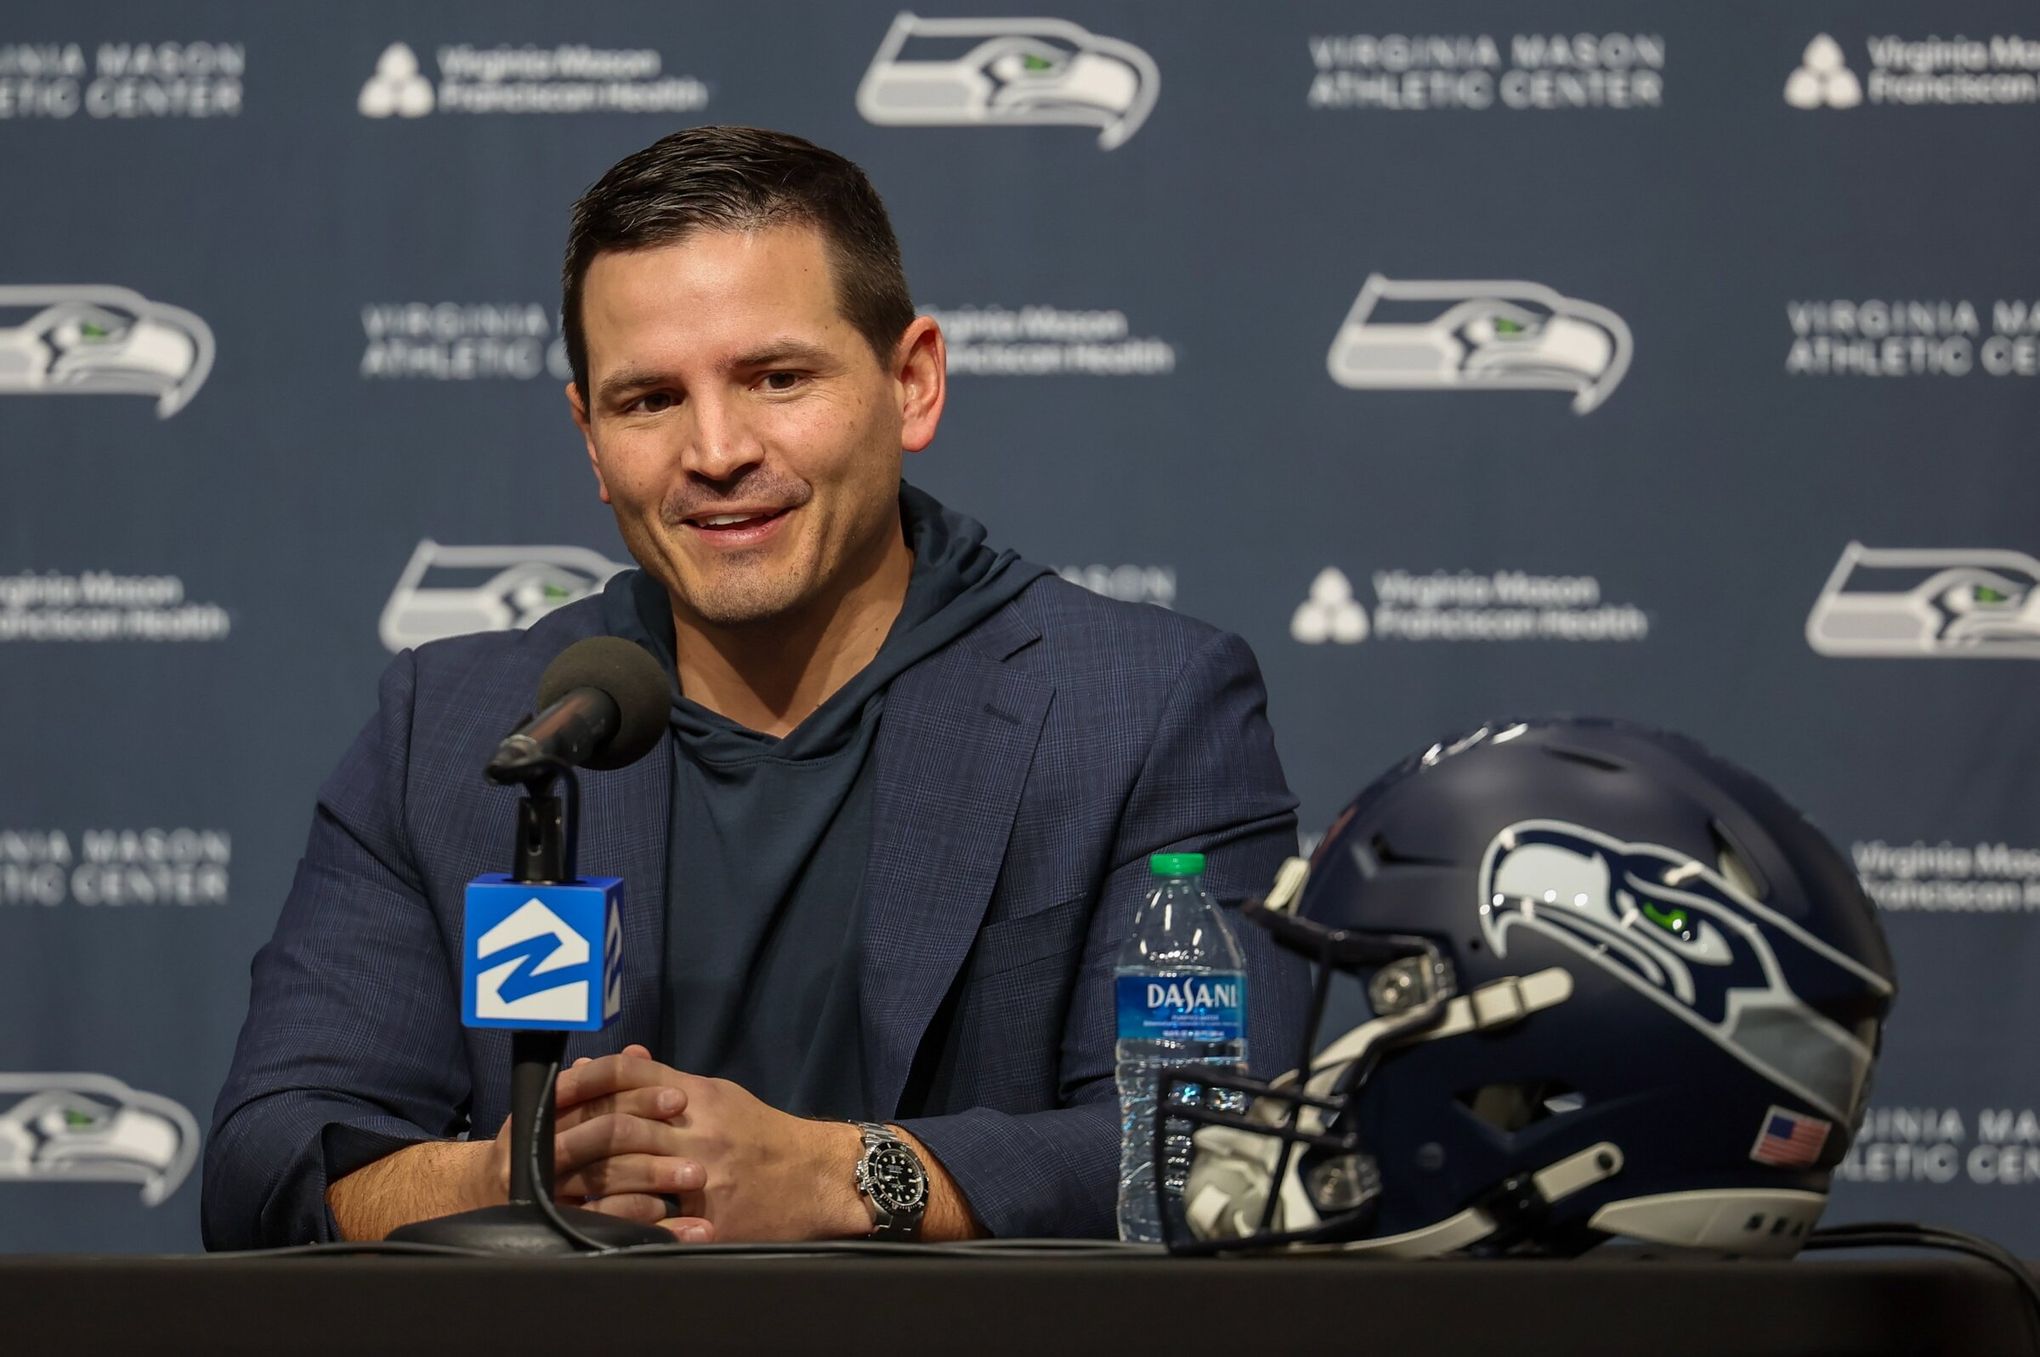 Seahawks assistant coaches are free to look for other jobs